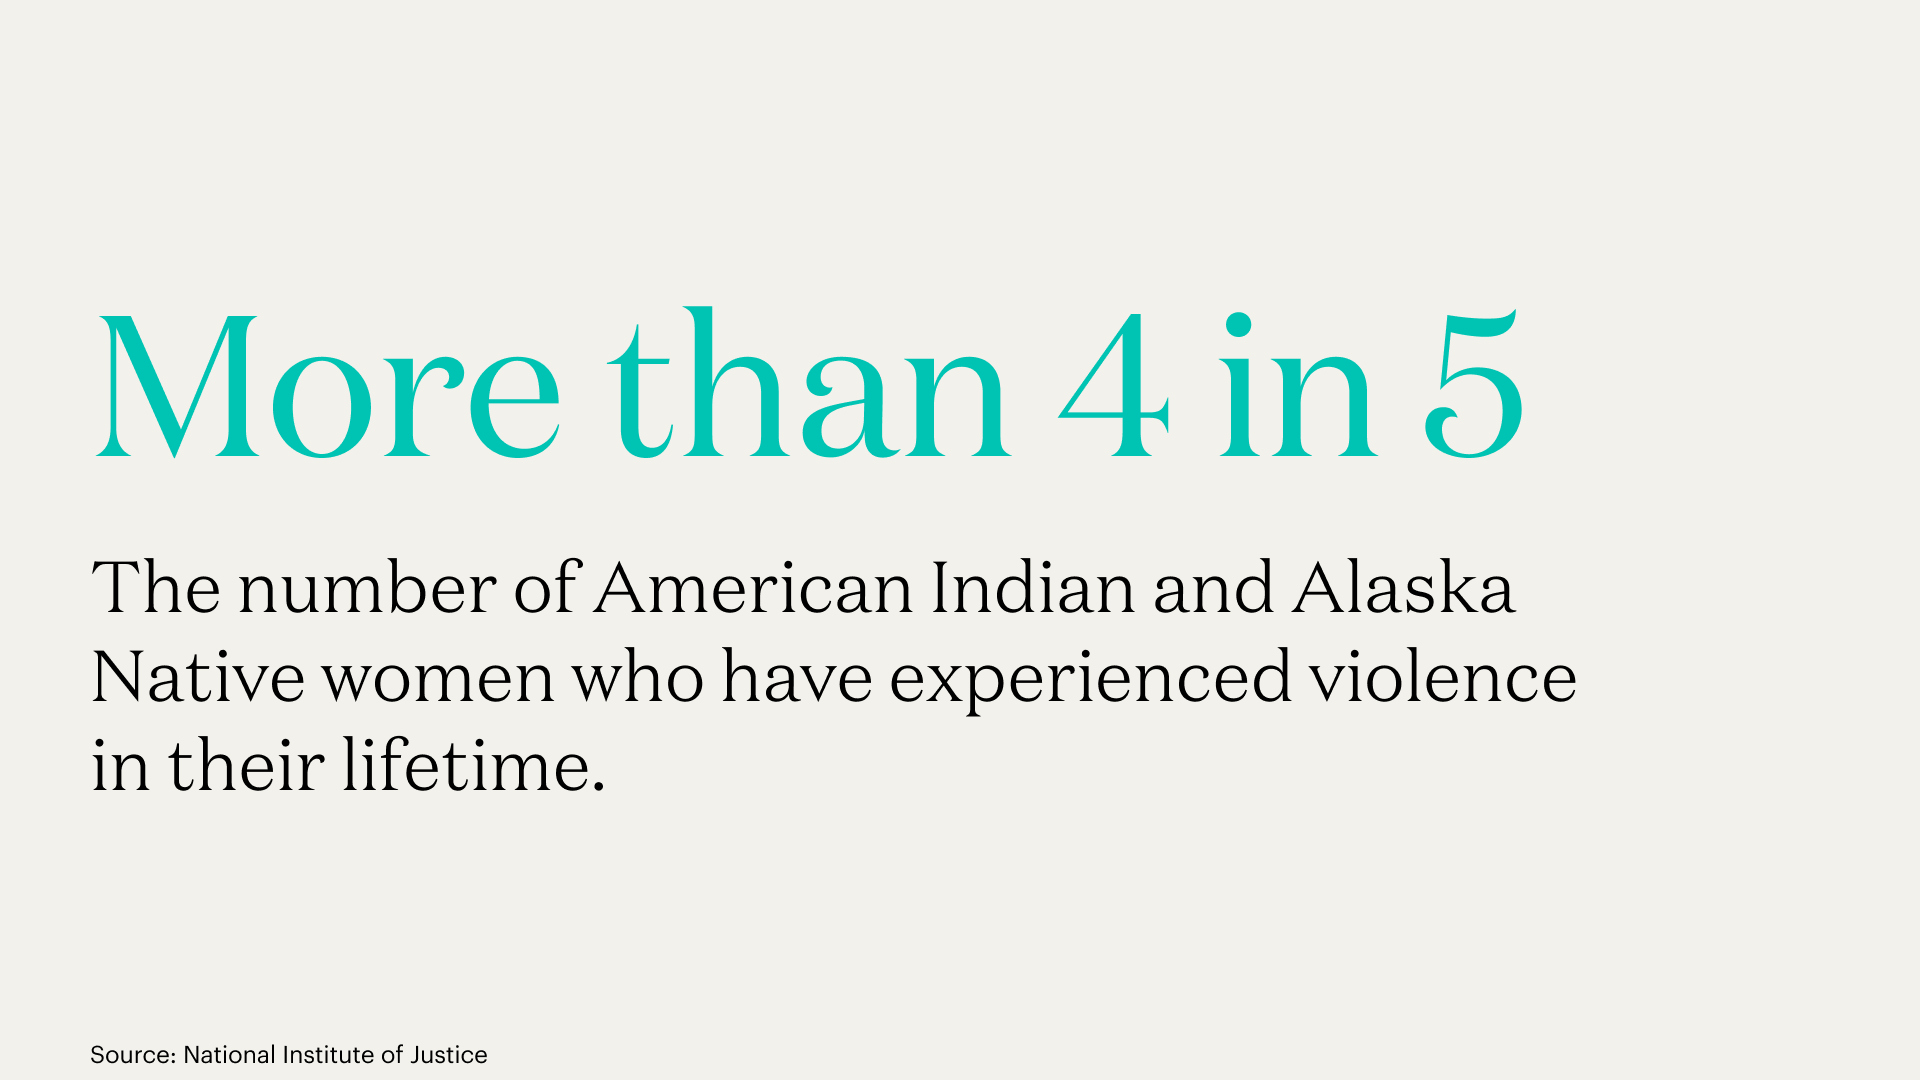 More than 4 in 5: The number of American Indian and Alaska Native women who have experienced violence in their lifetime.